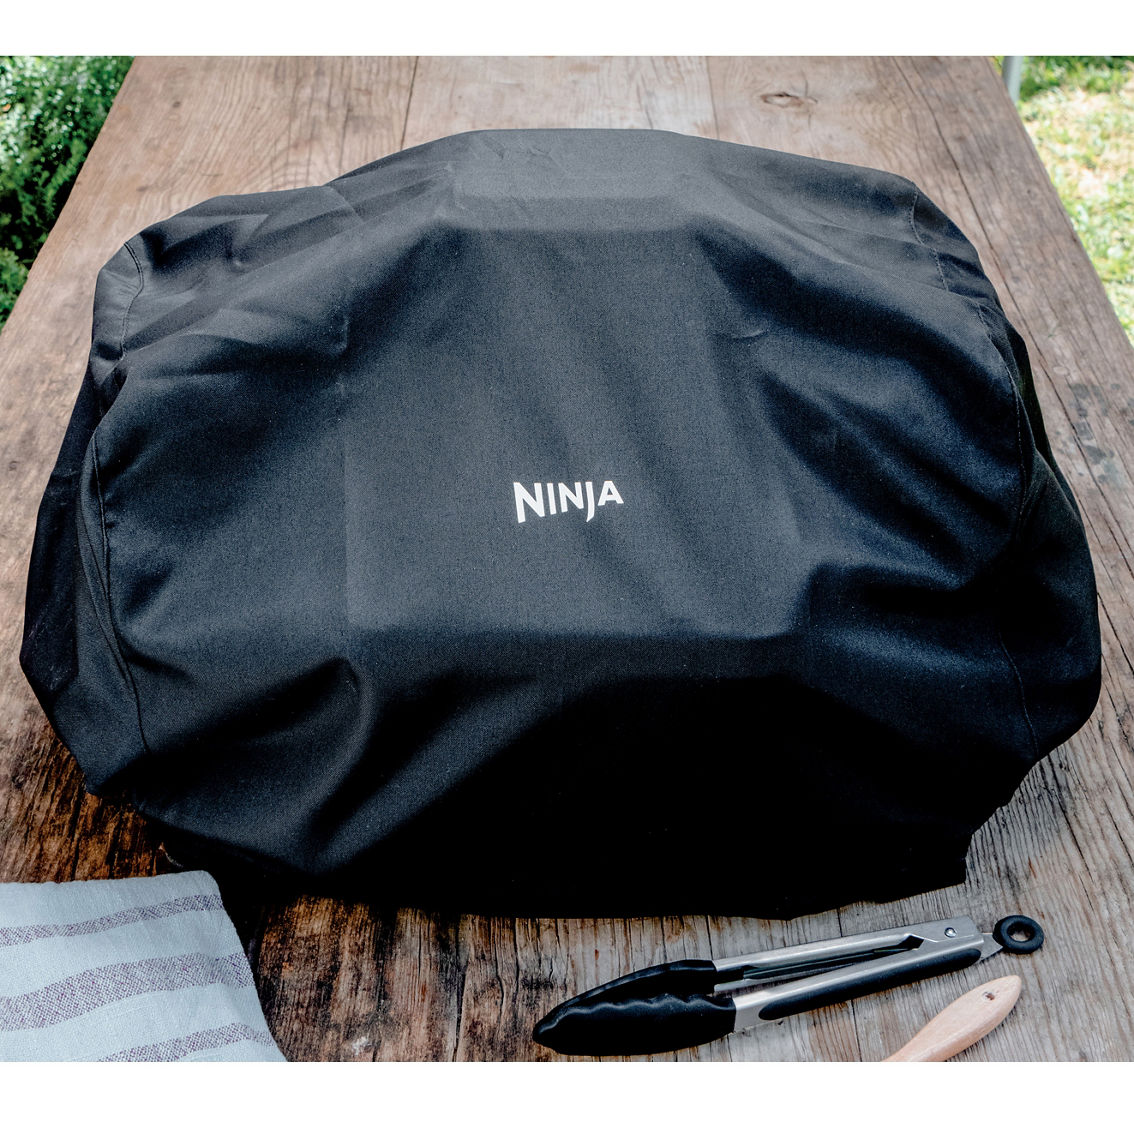 Ninja Outdoor Grill Cover - Image 2 of 2